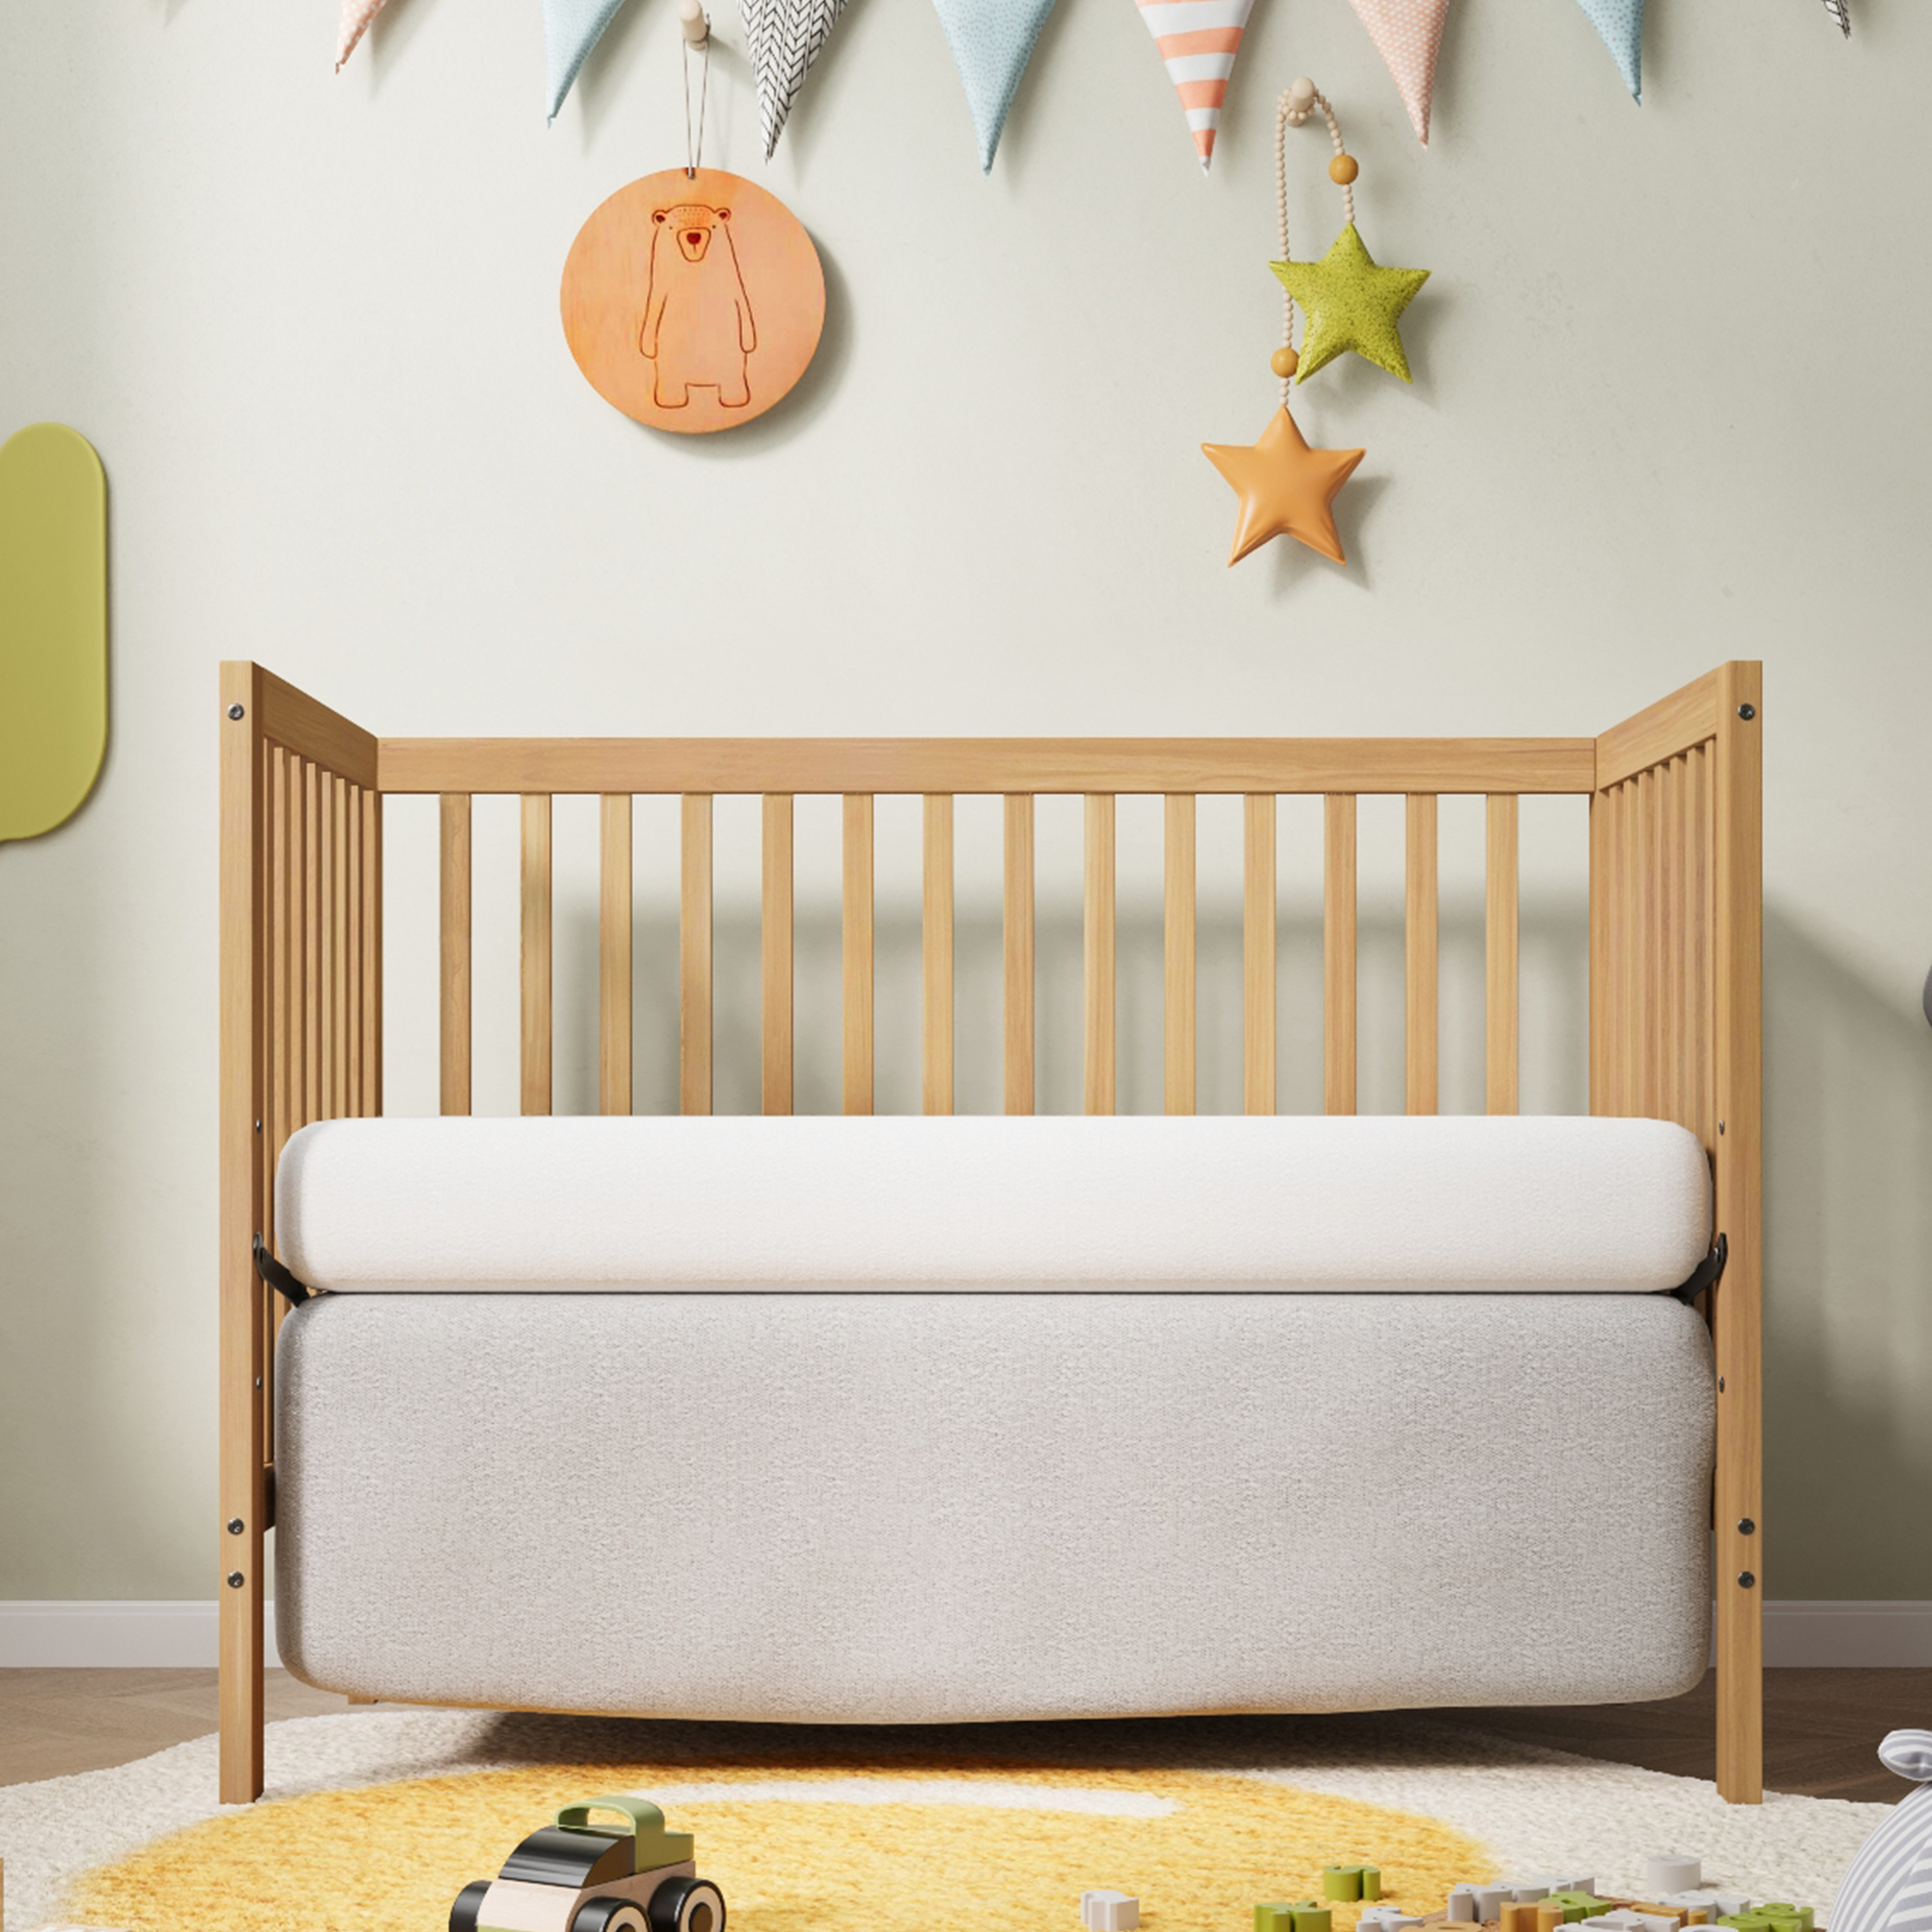 Sesslife 5-In-1 Convertible Crib, Baby Bed, Converts from Baby Crib to Toddler Bed, Fits Standard Full-Size Crib Mattress ,Easy to Assemble(Natural) - image 2 of 9